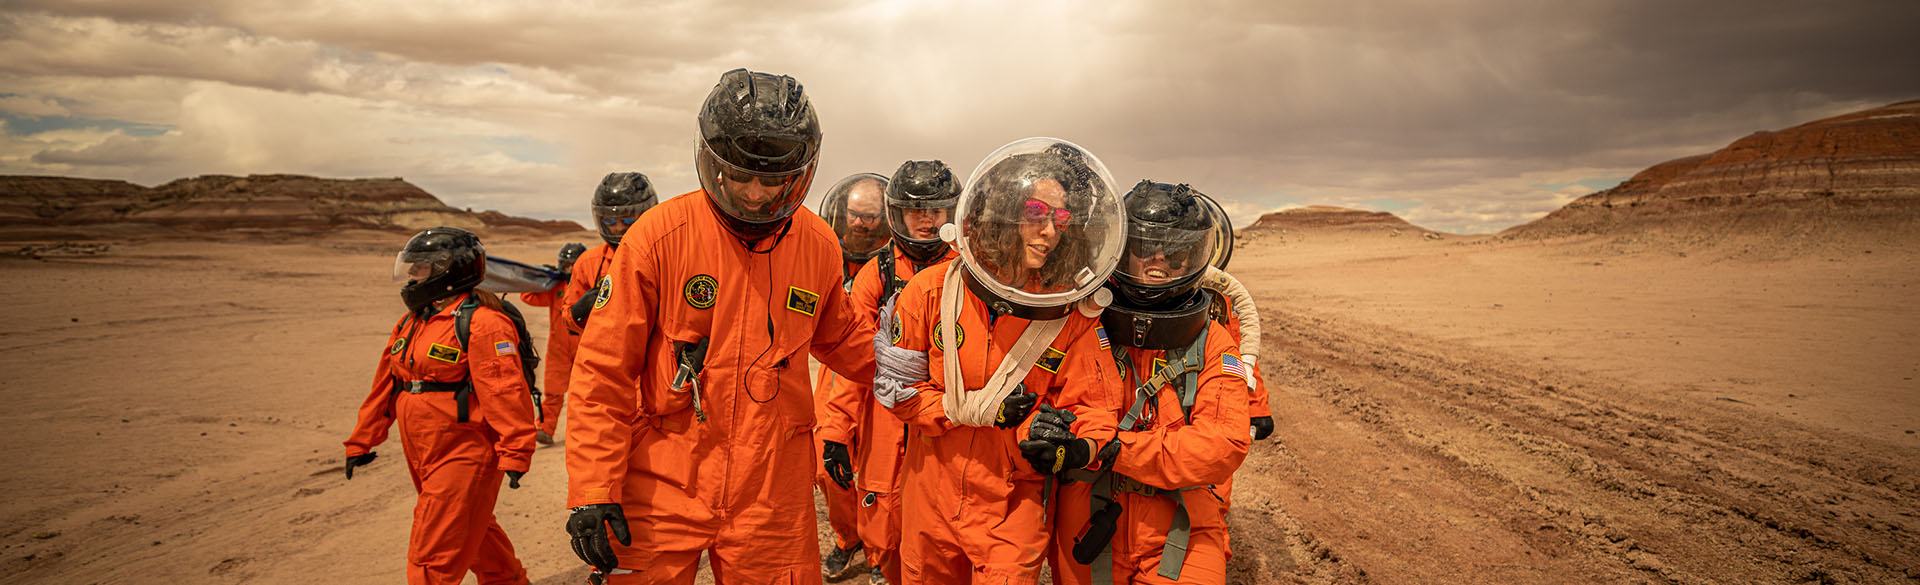 Students and instructors clad in orange space suits and space helmets train in desert